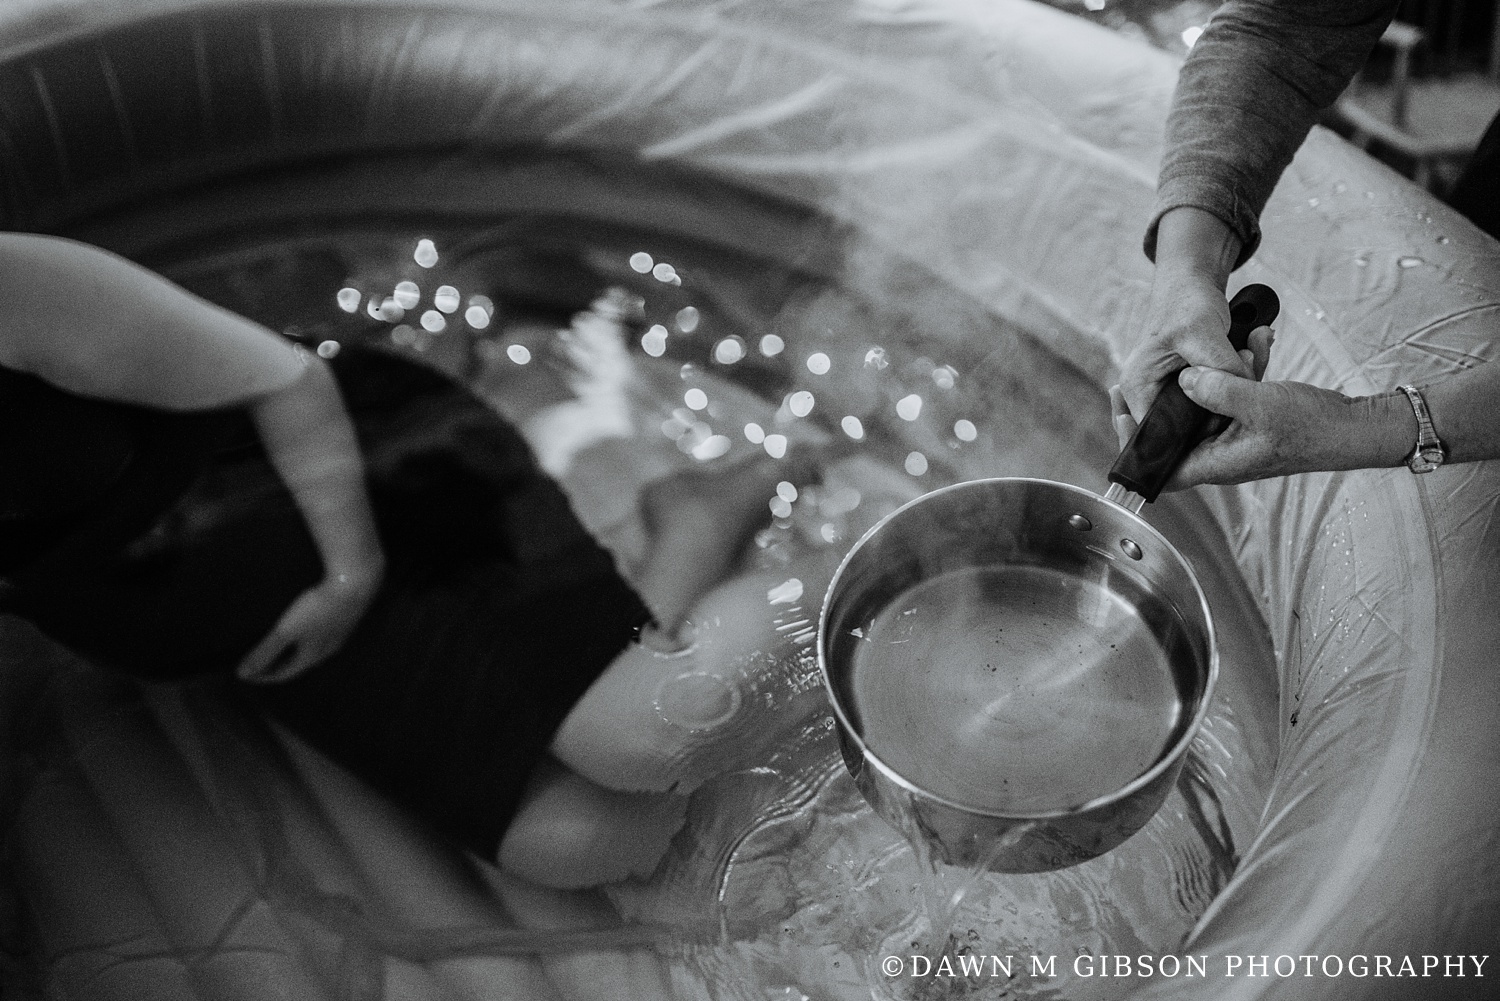 Birth Story Photos by Dawn M Gibson Photography